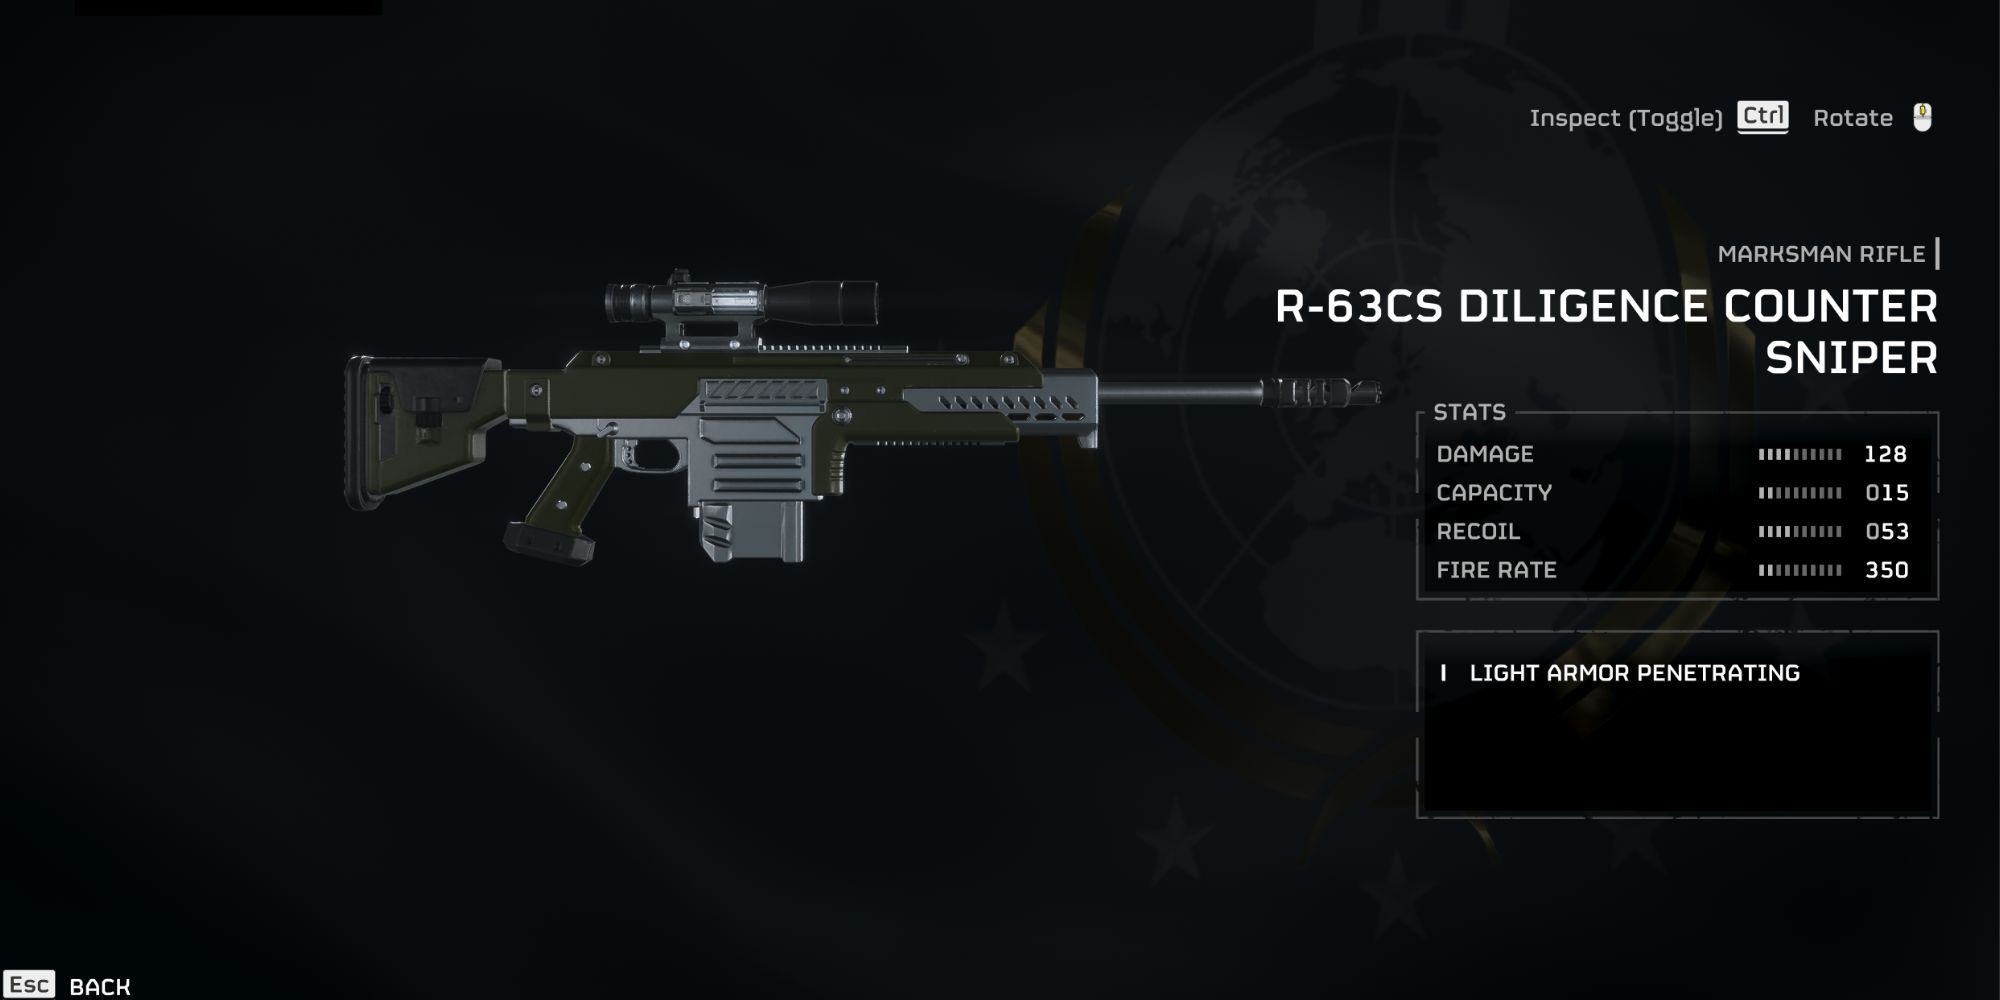 a screenshot of the details page for the R-63 CS Diligence Counter Sniper